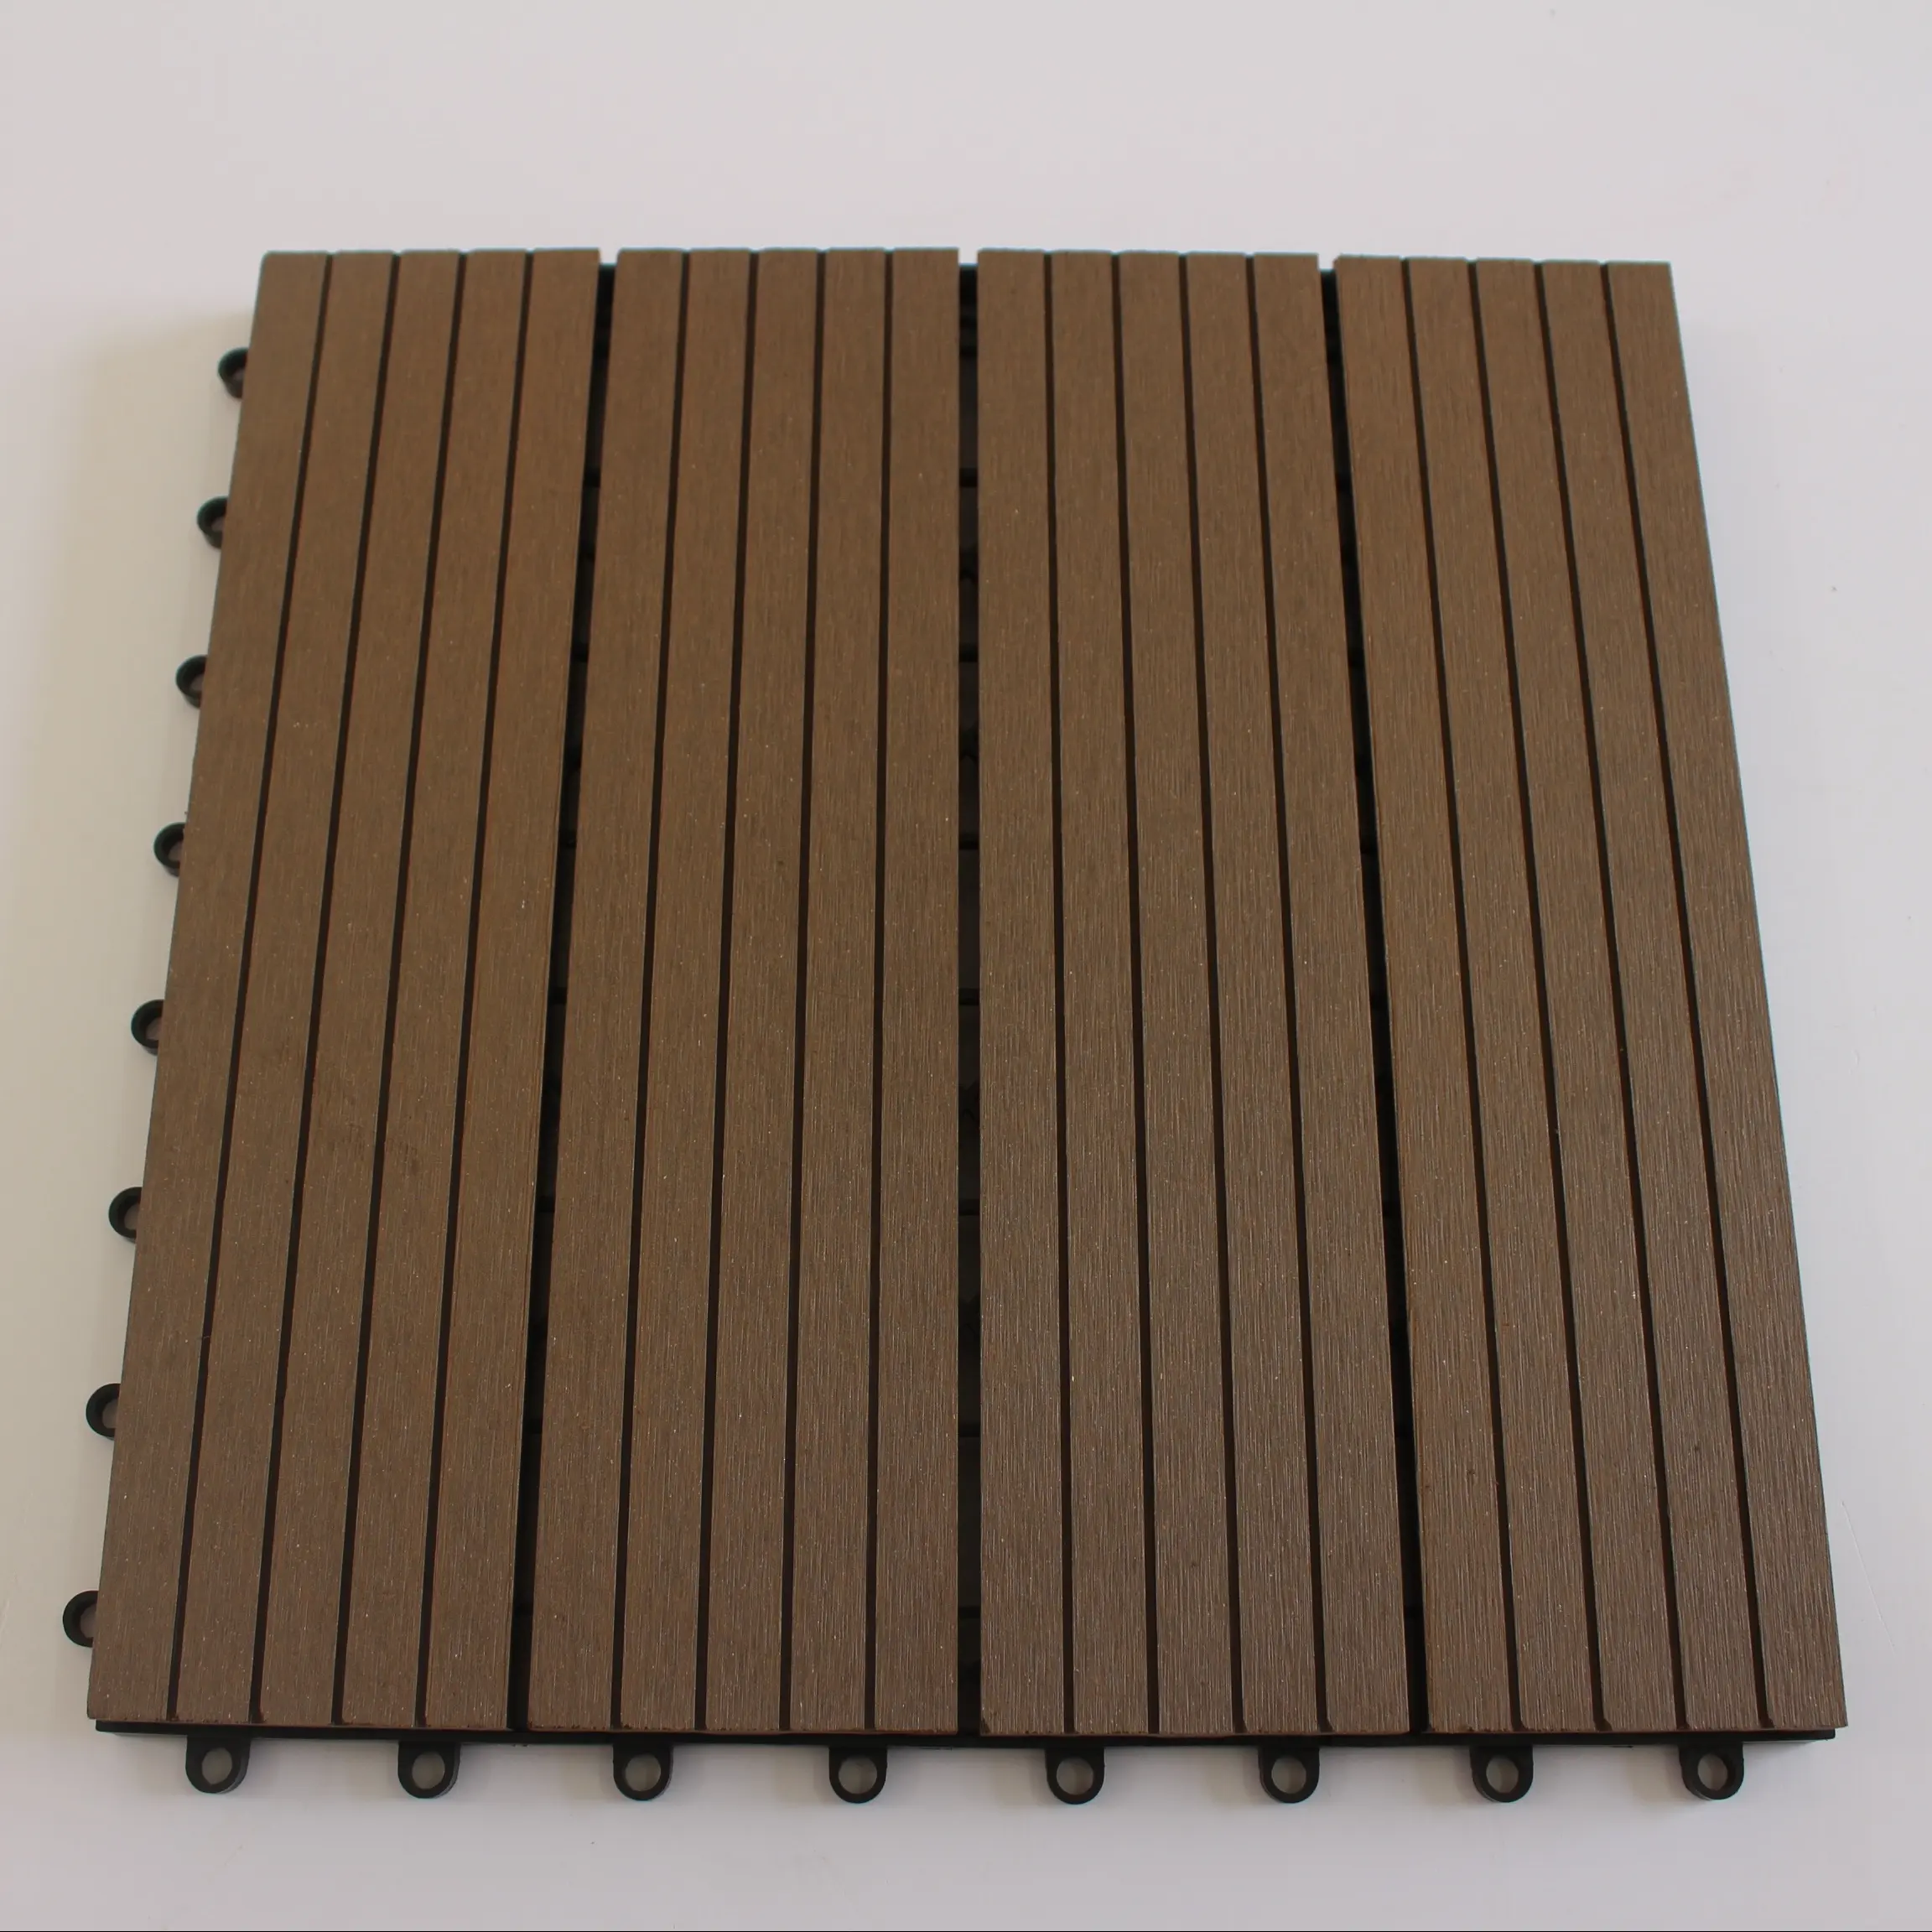 2019 New easy installation DIY decking/ waterproof wpc diy decking tiles for garden and home.